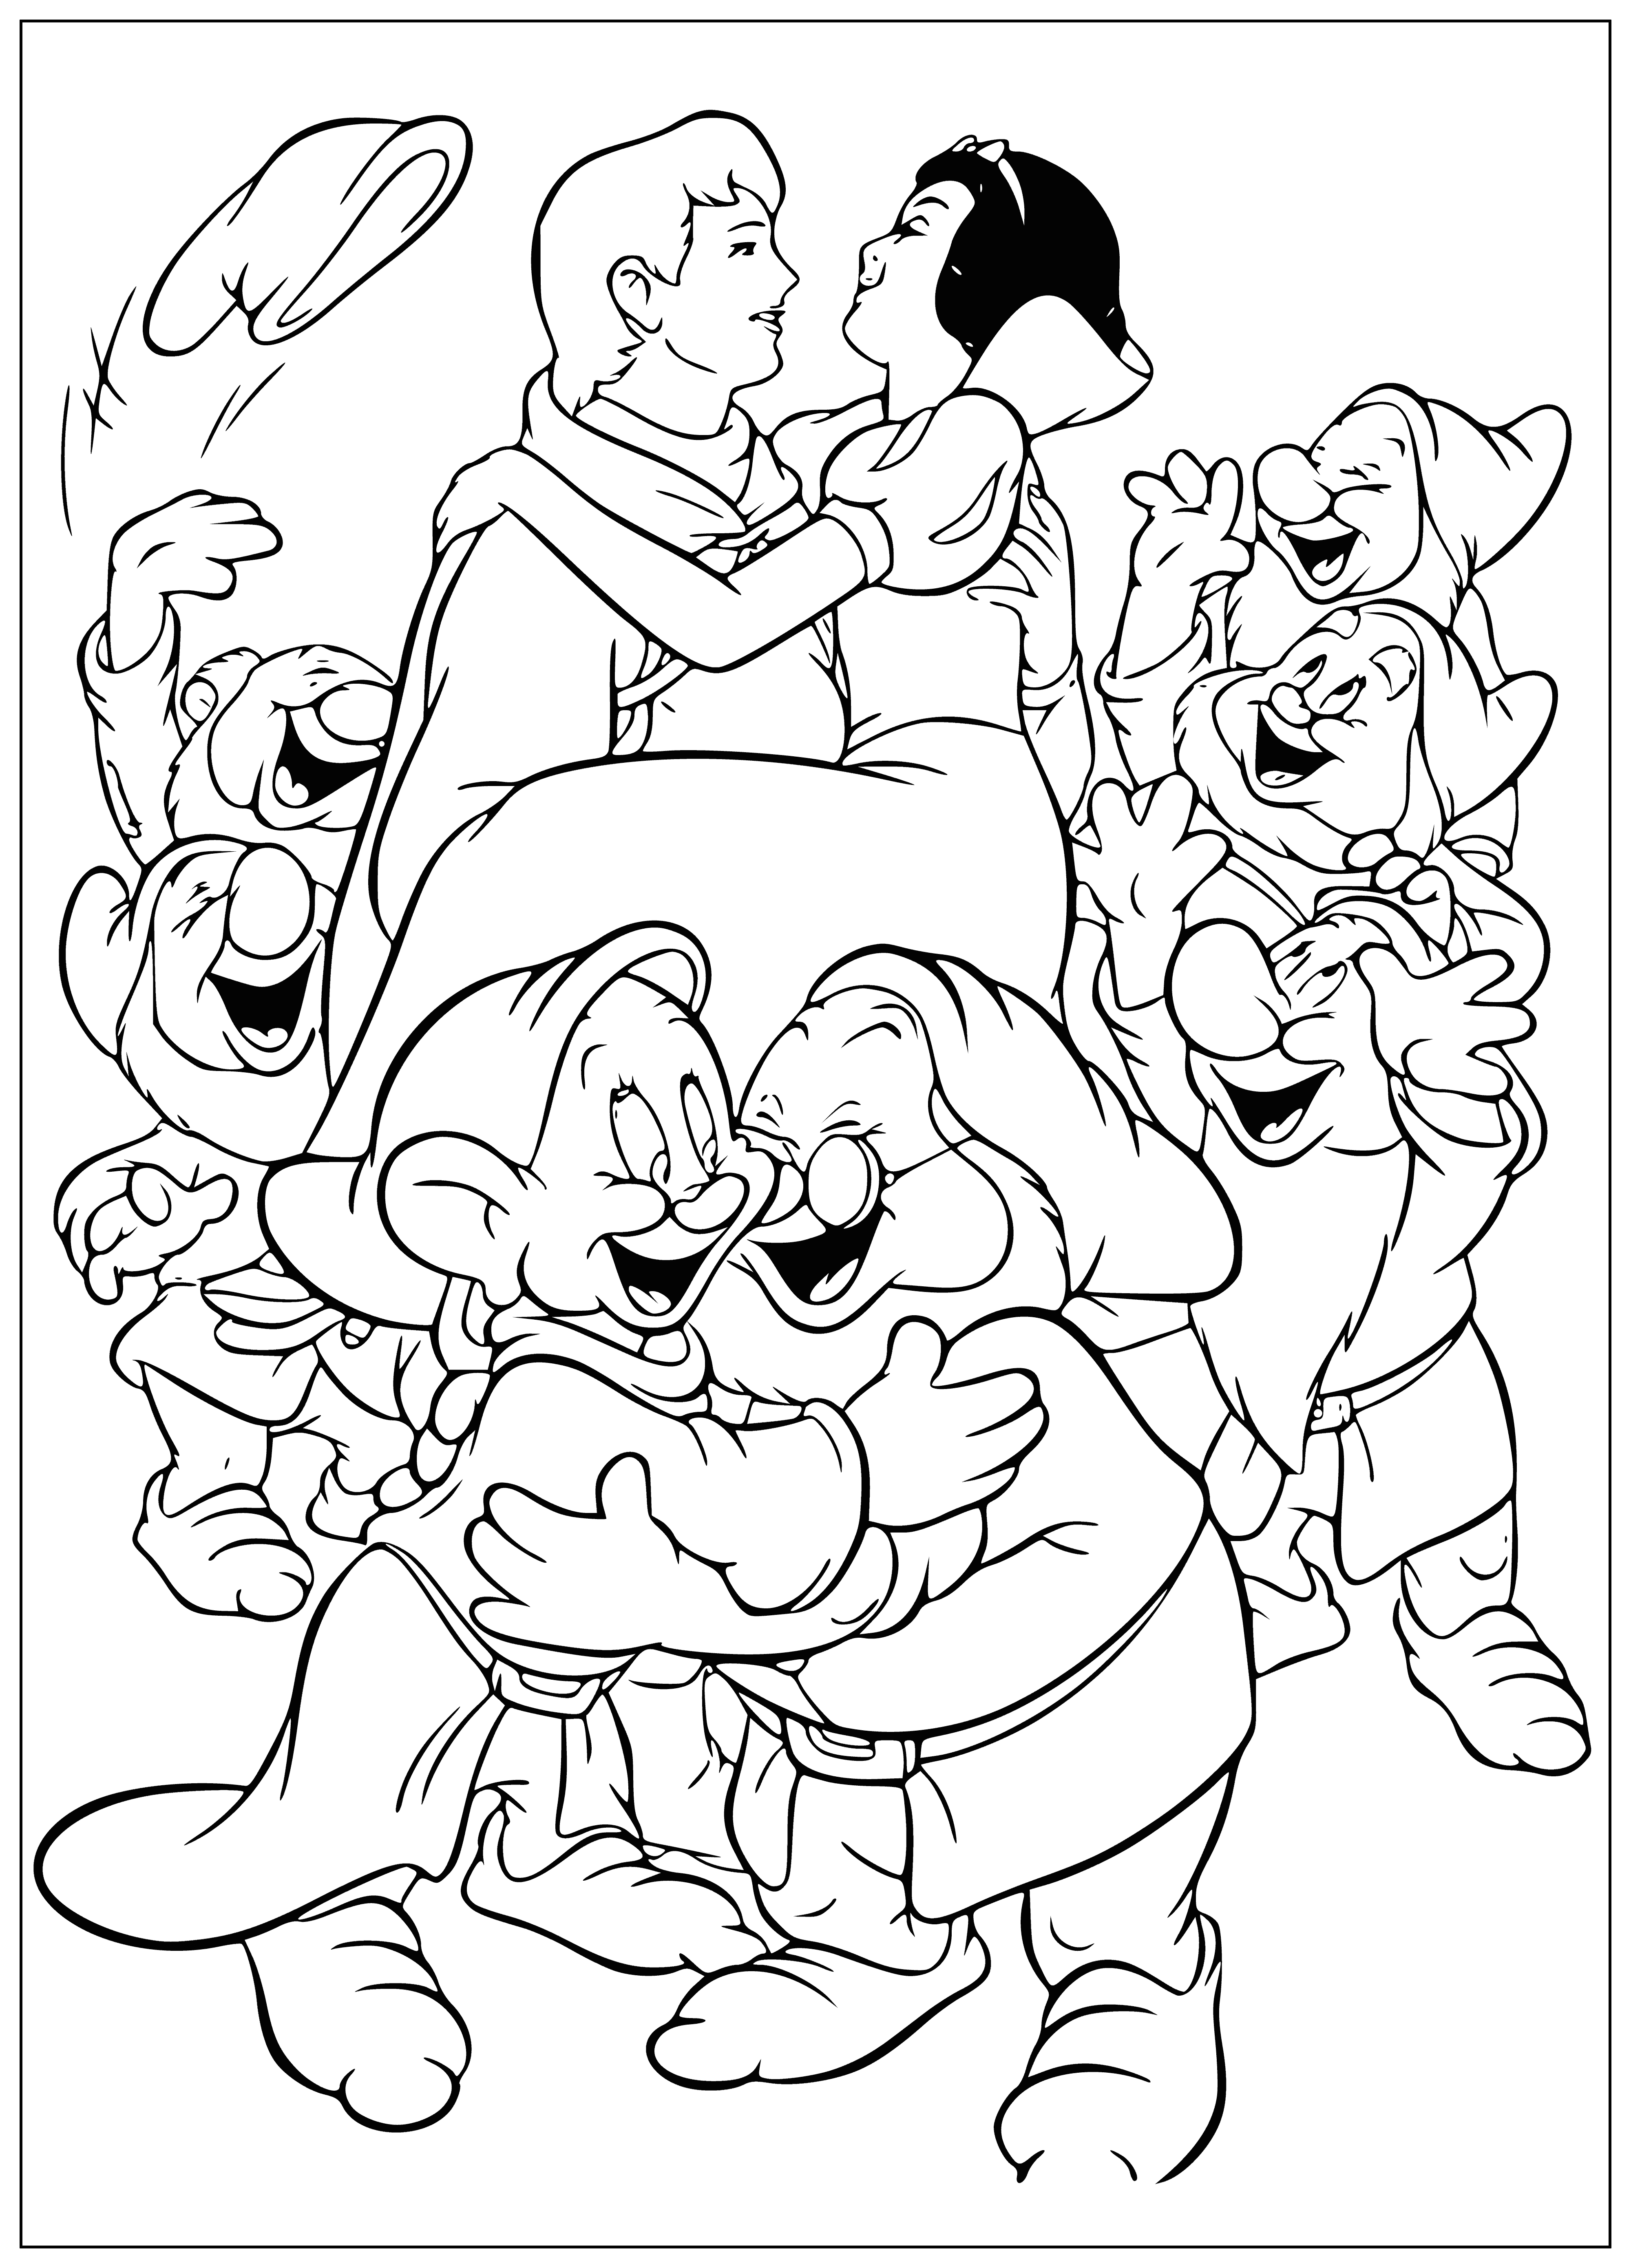 Snow White's Wedding coloring page